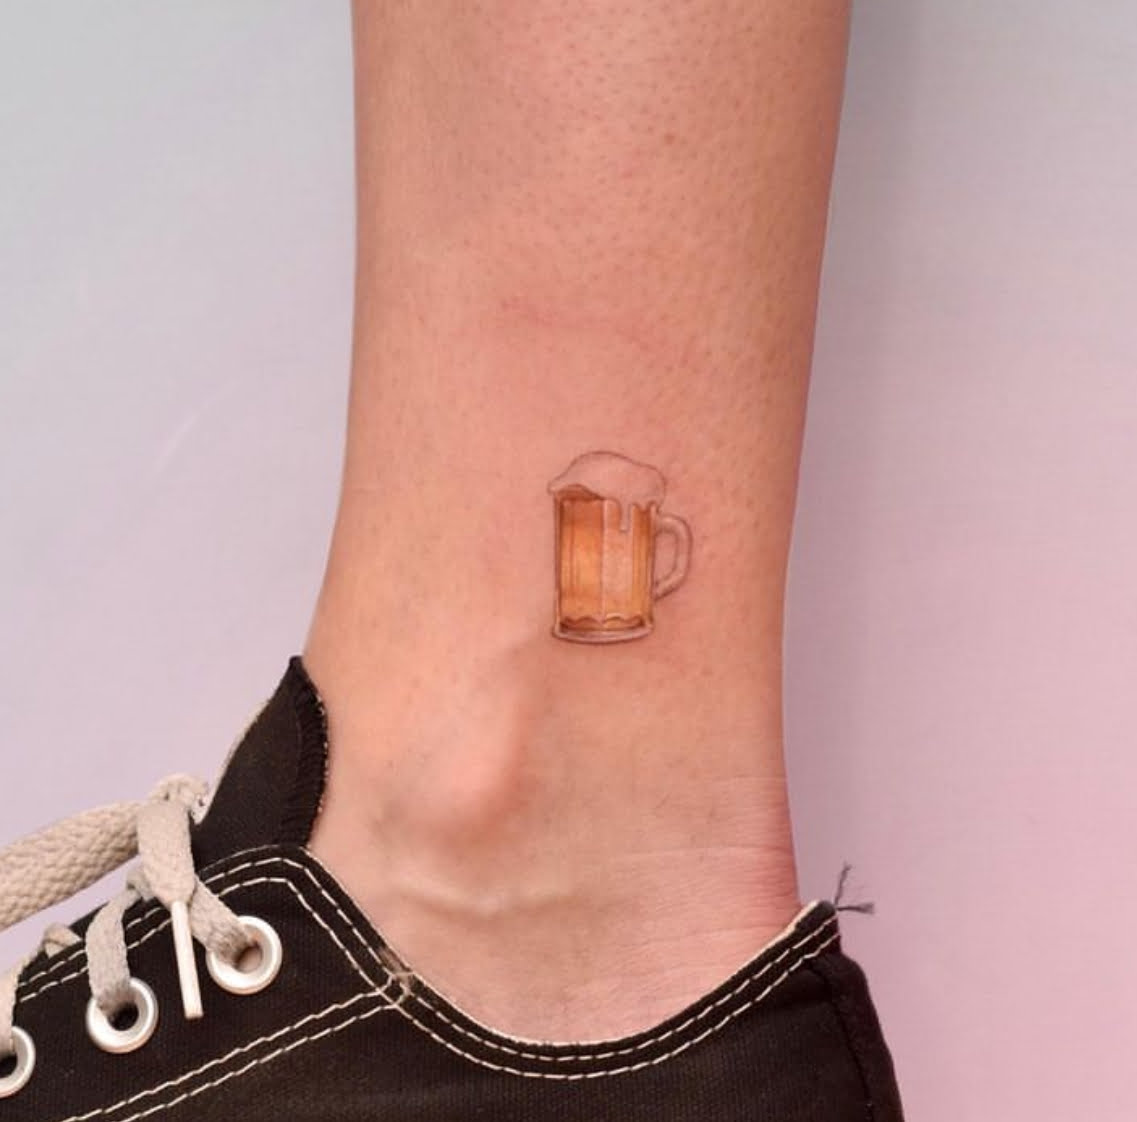 20 Micro Realism Tattoos that should be in a Museum